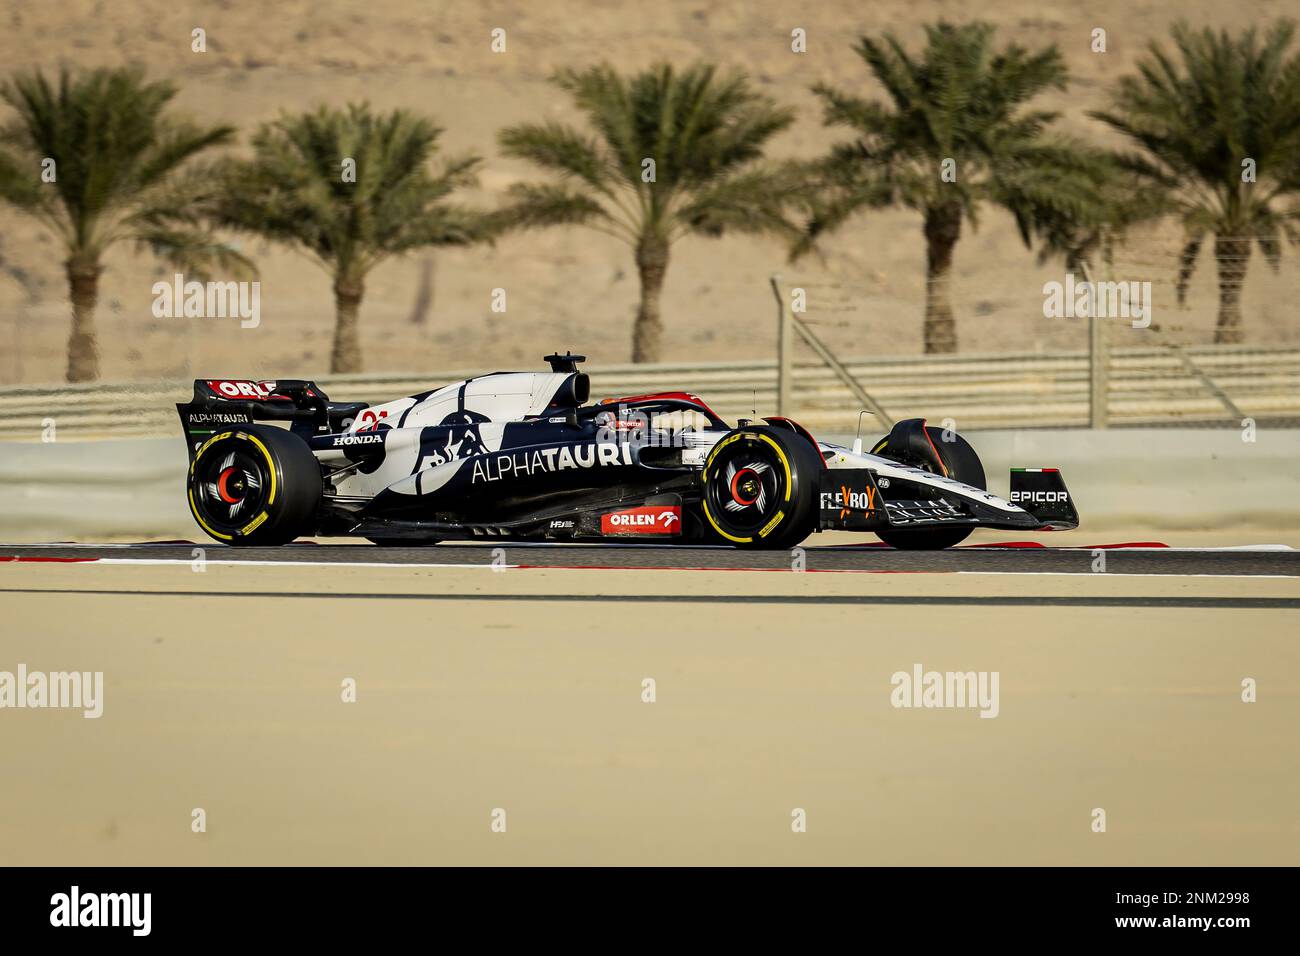 BAHRAIN - 24/02/2023, Nyck de Vries (AlphaTauri) during the second day of testing at the Bahrain International Circuit ahead of the start of the Formula 1 season. ANP SEM VAN DER WAL netherlands out - belgium out Credit: ANP/Alamy Live News Stock Photo